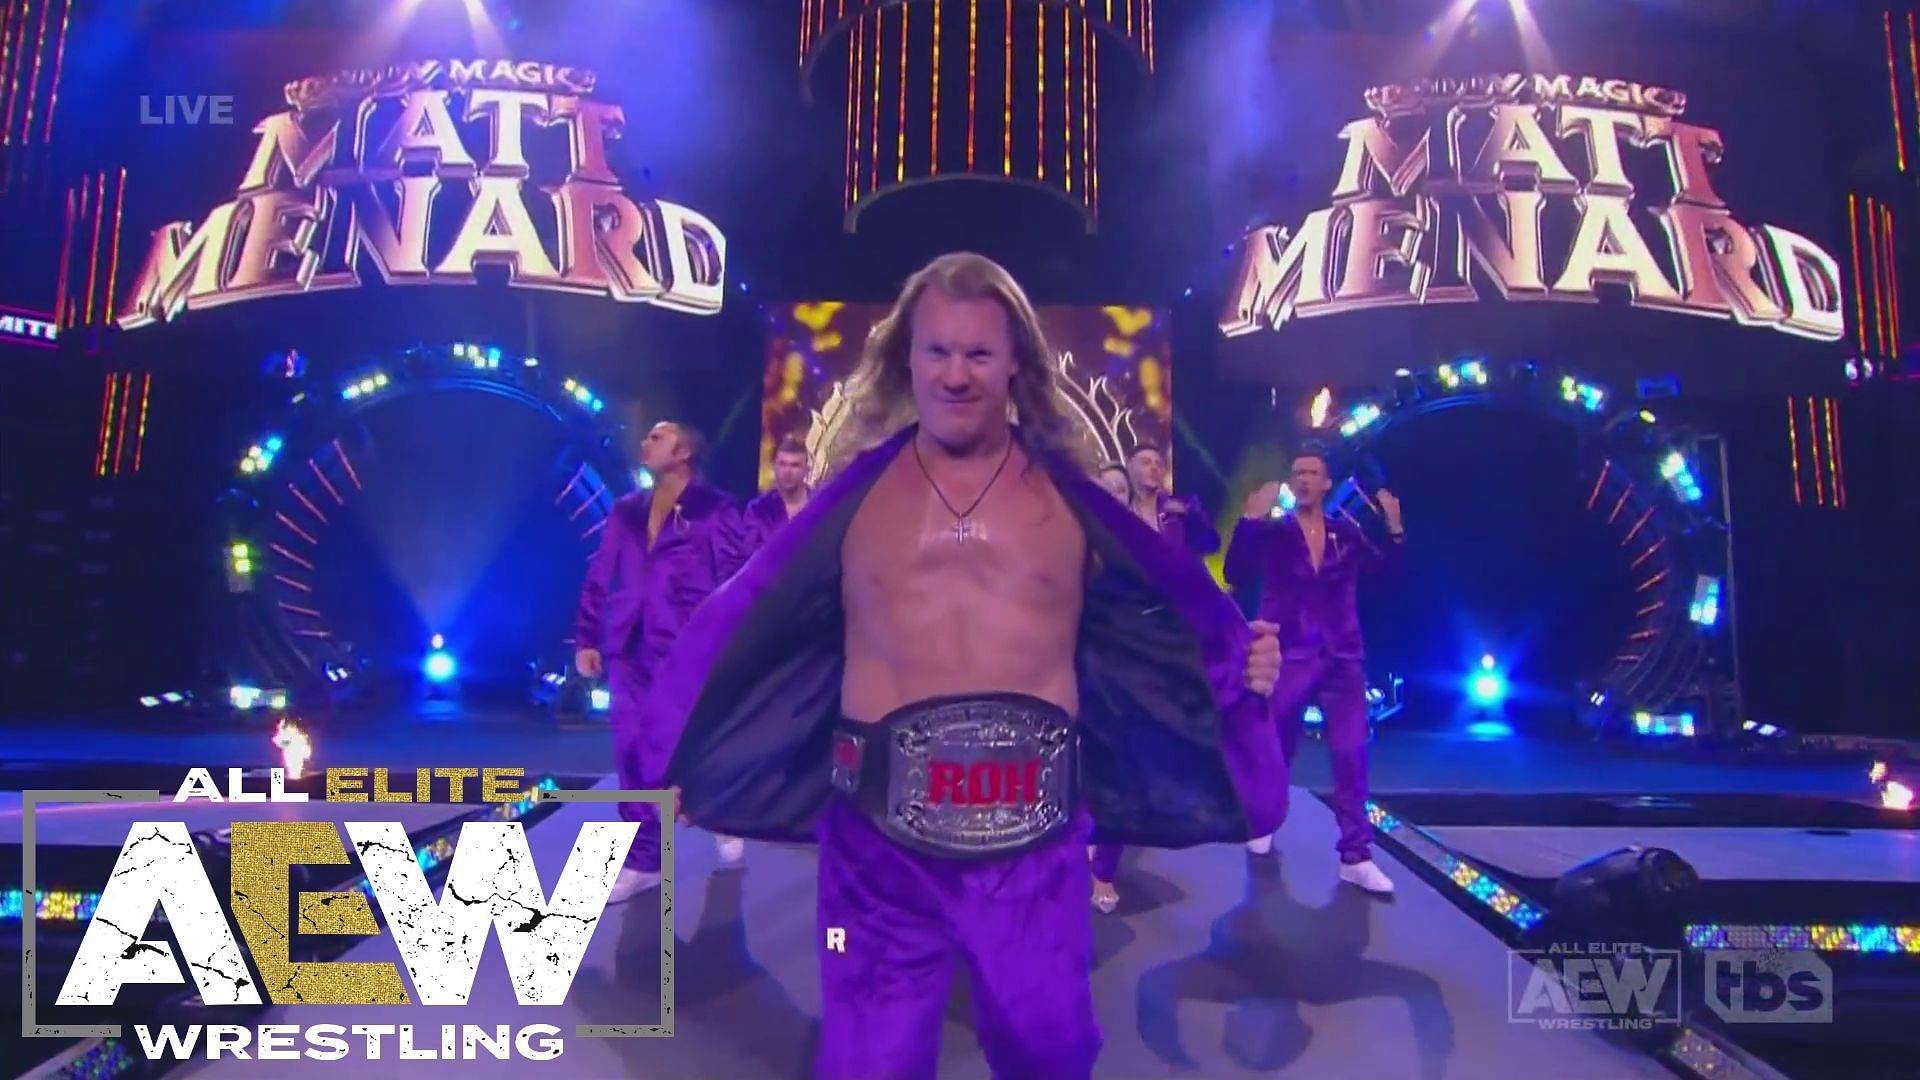 Jericho, making his way down the AEW Dynamite stage ramp.